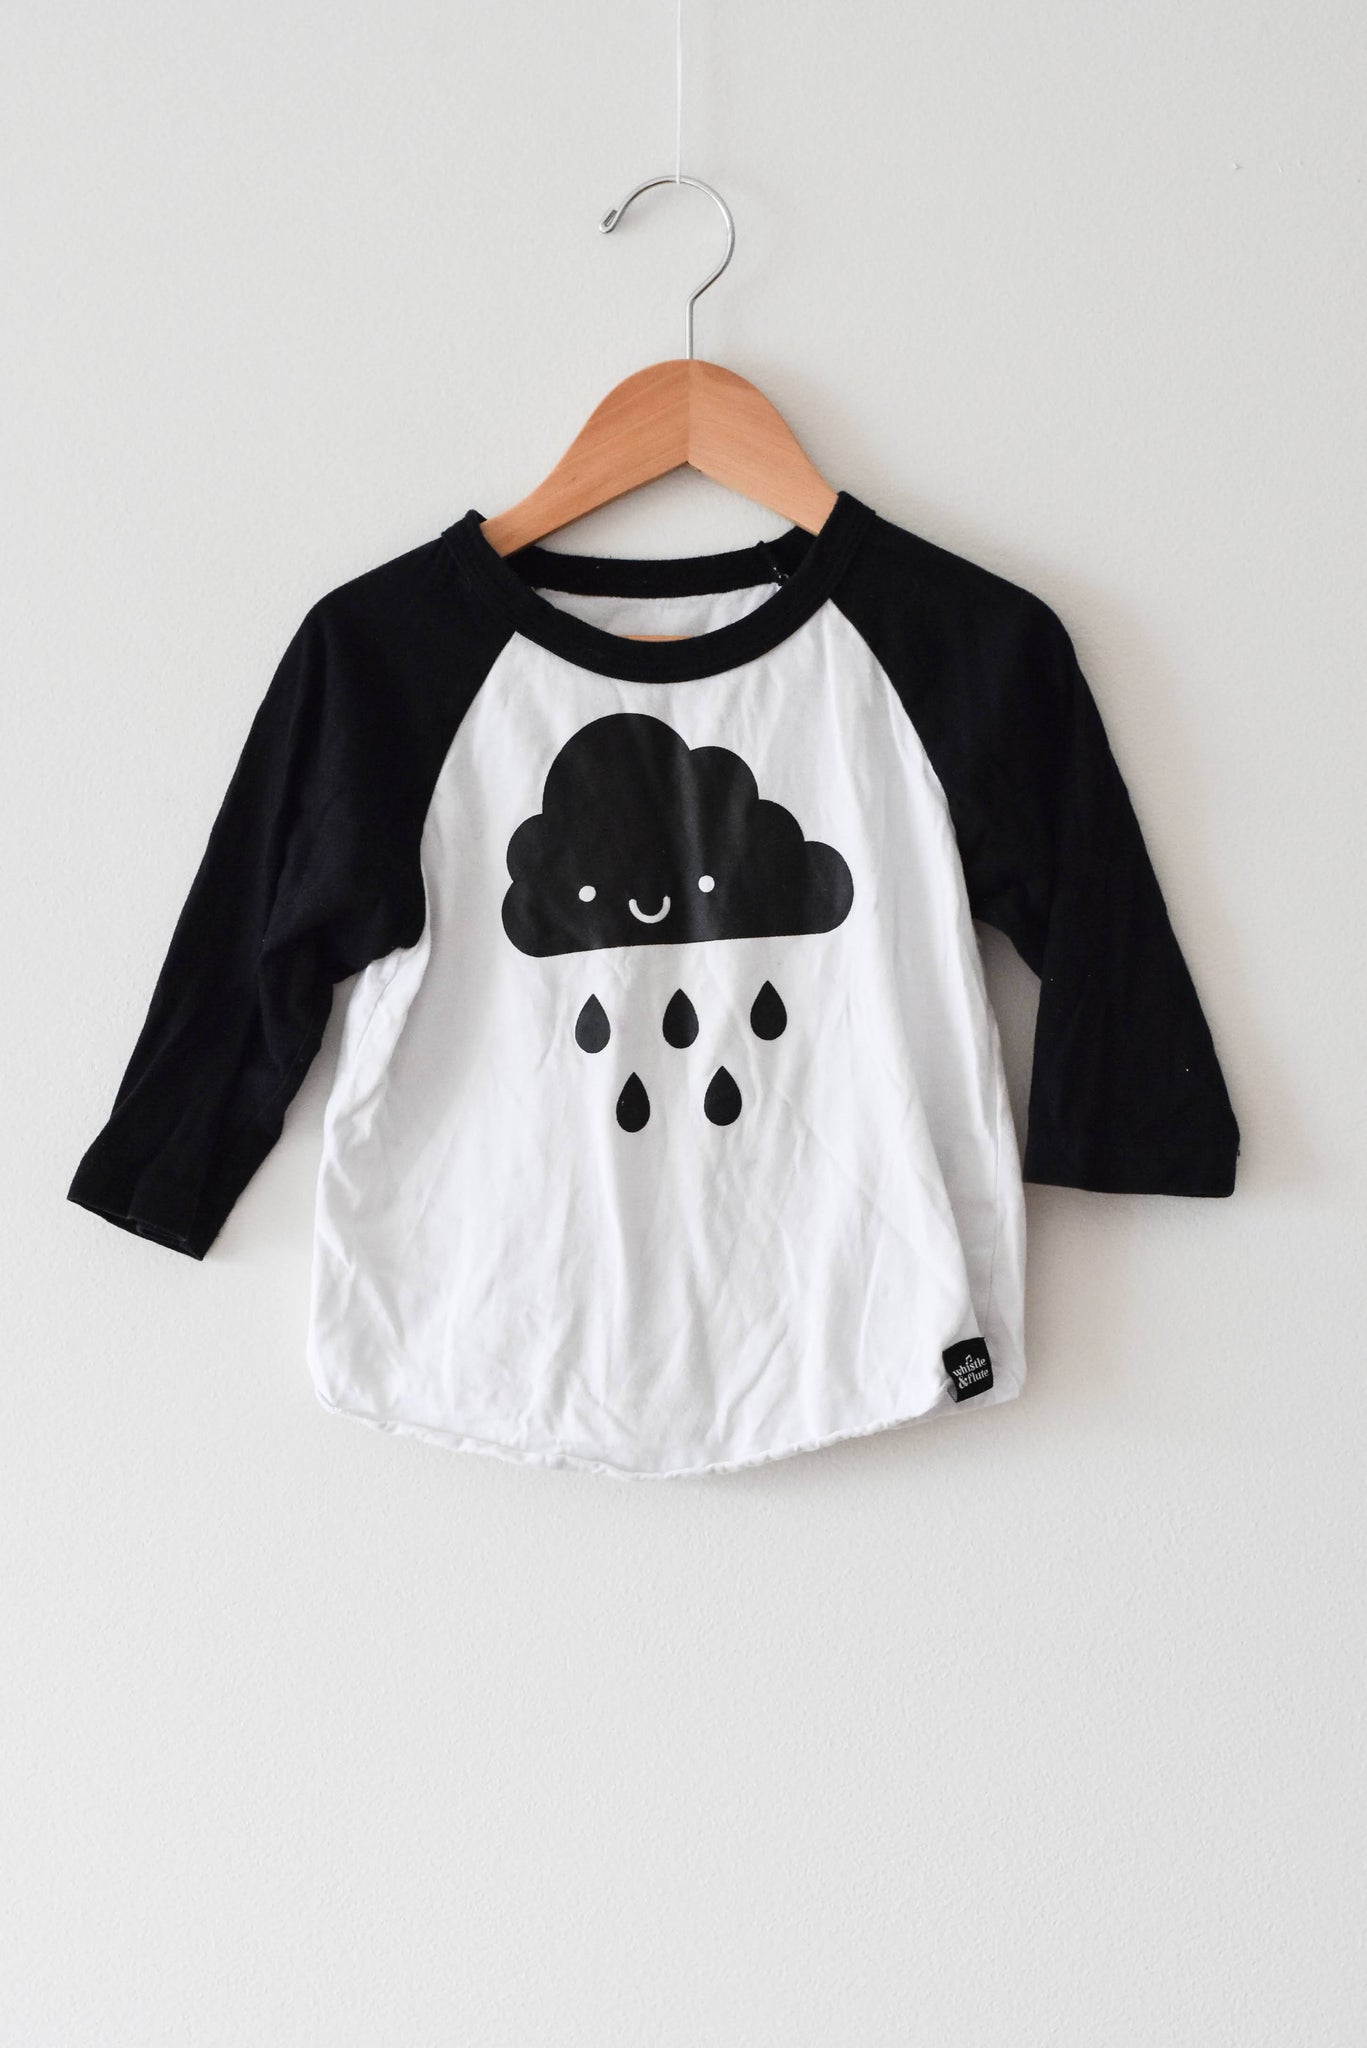 Whistle and Flute Cloud Raglan • 1-2 years